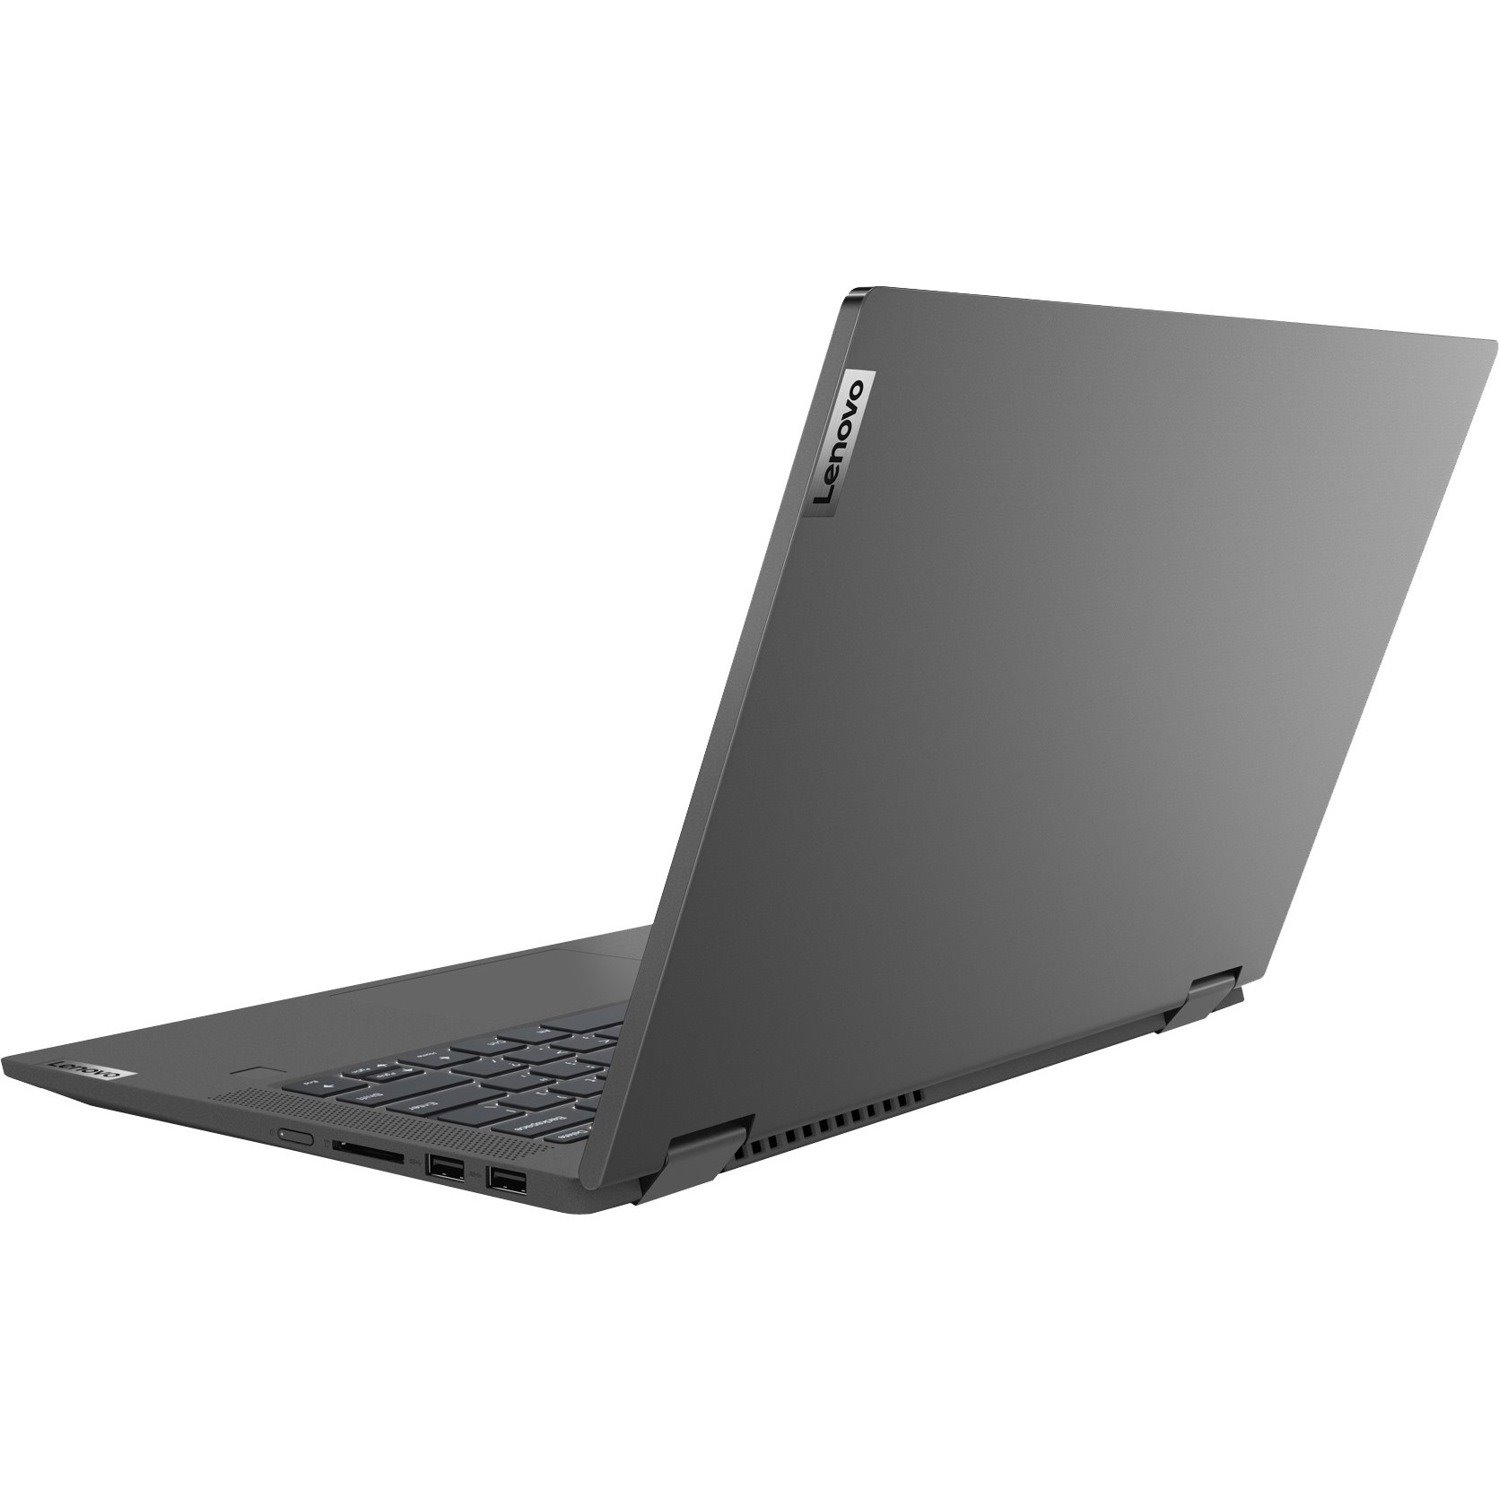 Lenovo IdeaPad Flex 5 14ITL05 82HS00QFCF 14" Touchscreen Convertible 2 in 1 Notebook - Full HD - Intel Core i7 11th Gen i7-1165G7 - 16 GB - 512 GB SSD - English (US), French Keyboard - Graphite Gray